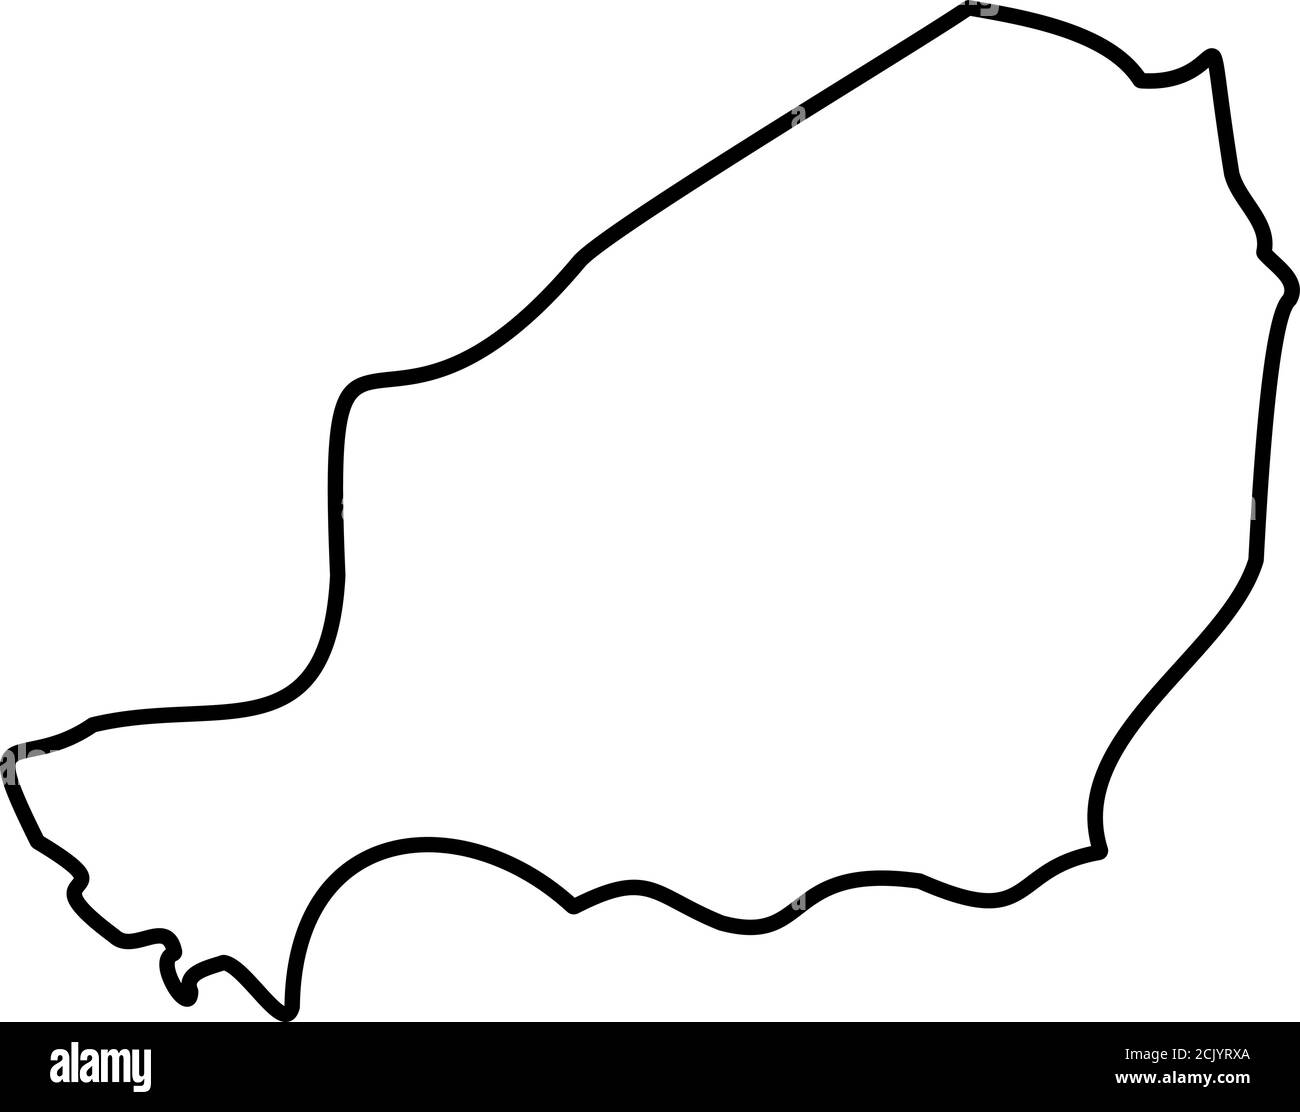 Niger - solid black outline border map of country area. Simple flat ...